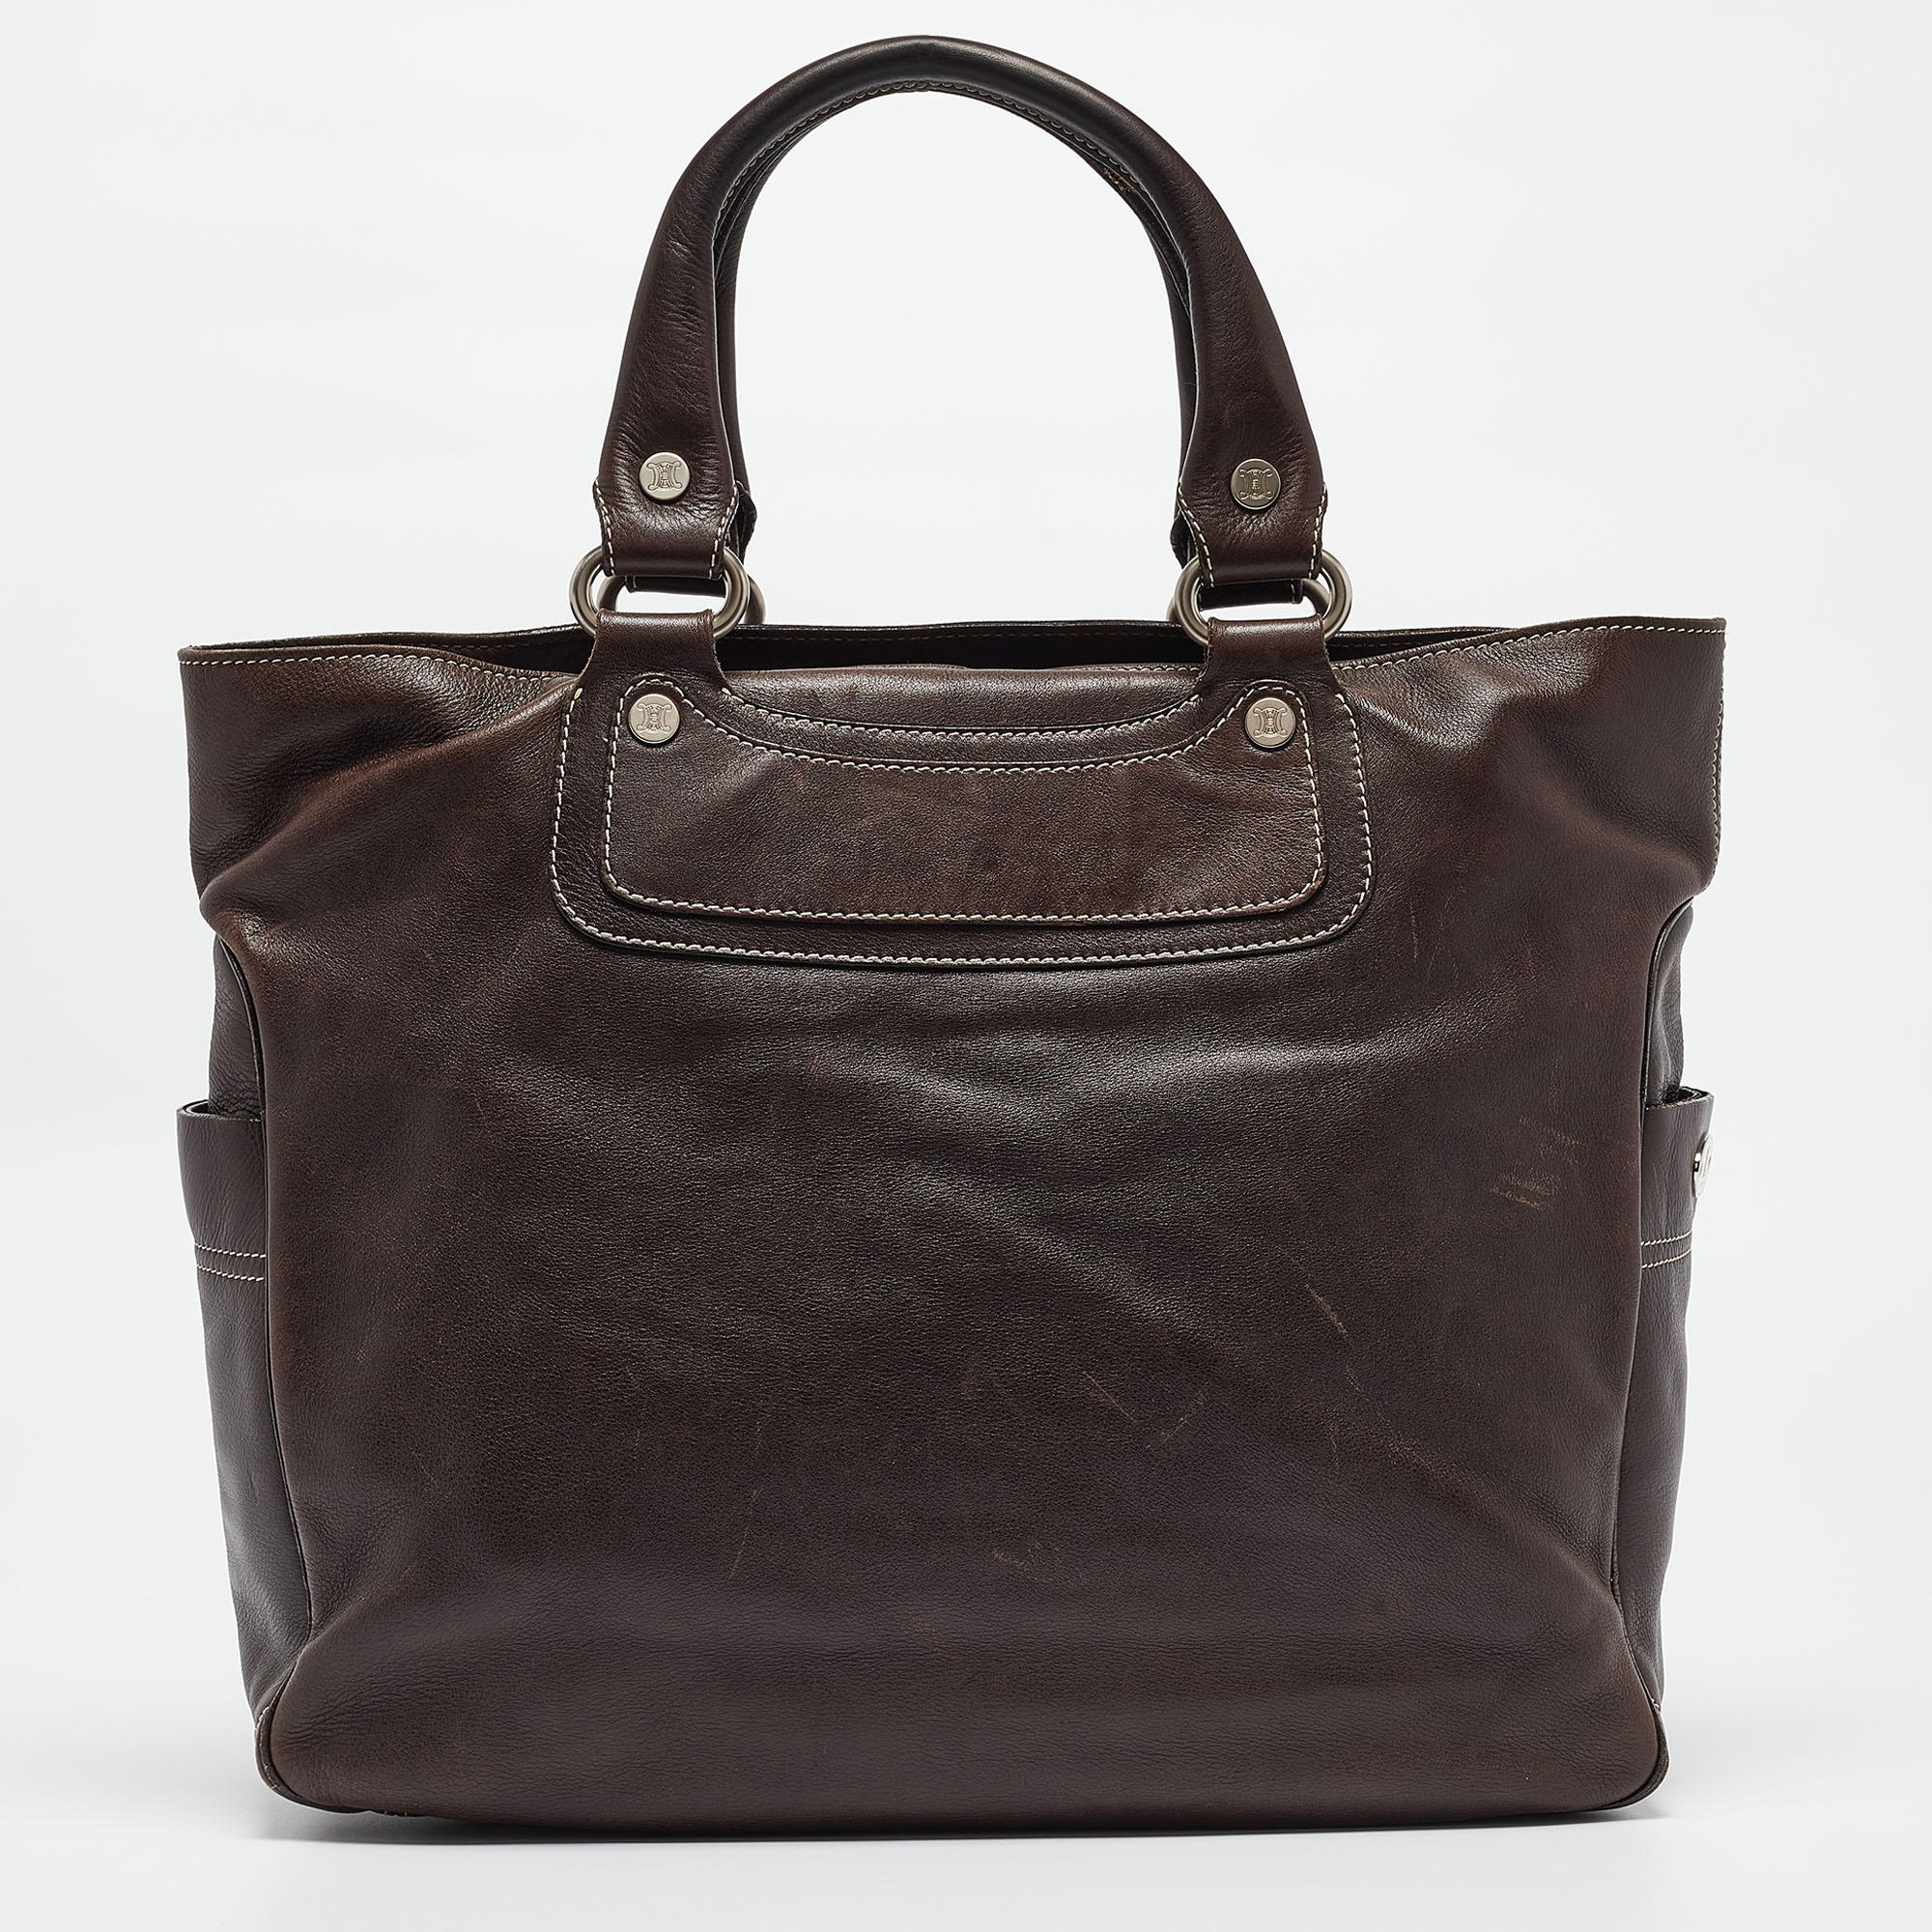 Created from high quality materials this tote is enriched with functional and classic elements. It can be carried around conveniently and its interior is perfectly sized to keep your belongings with ease.